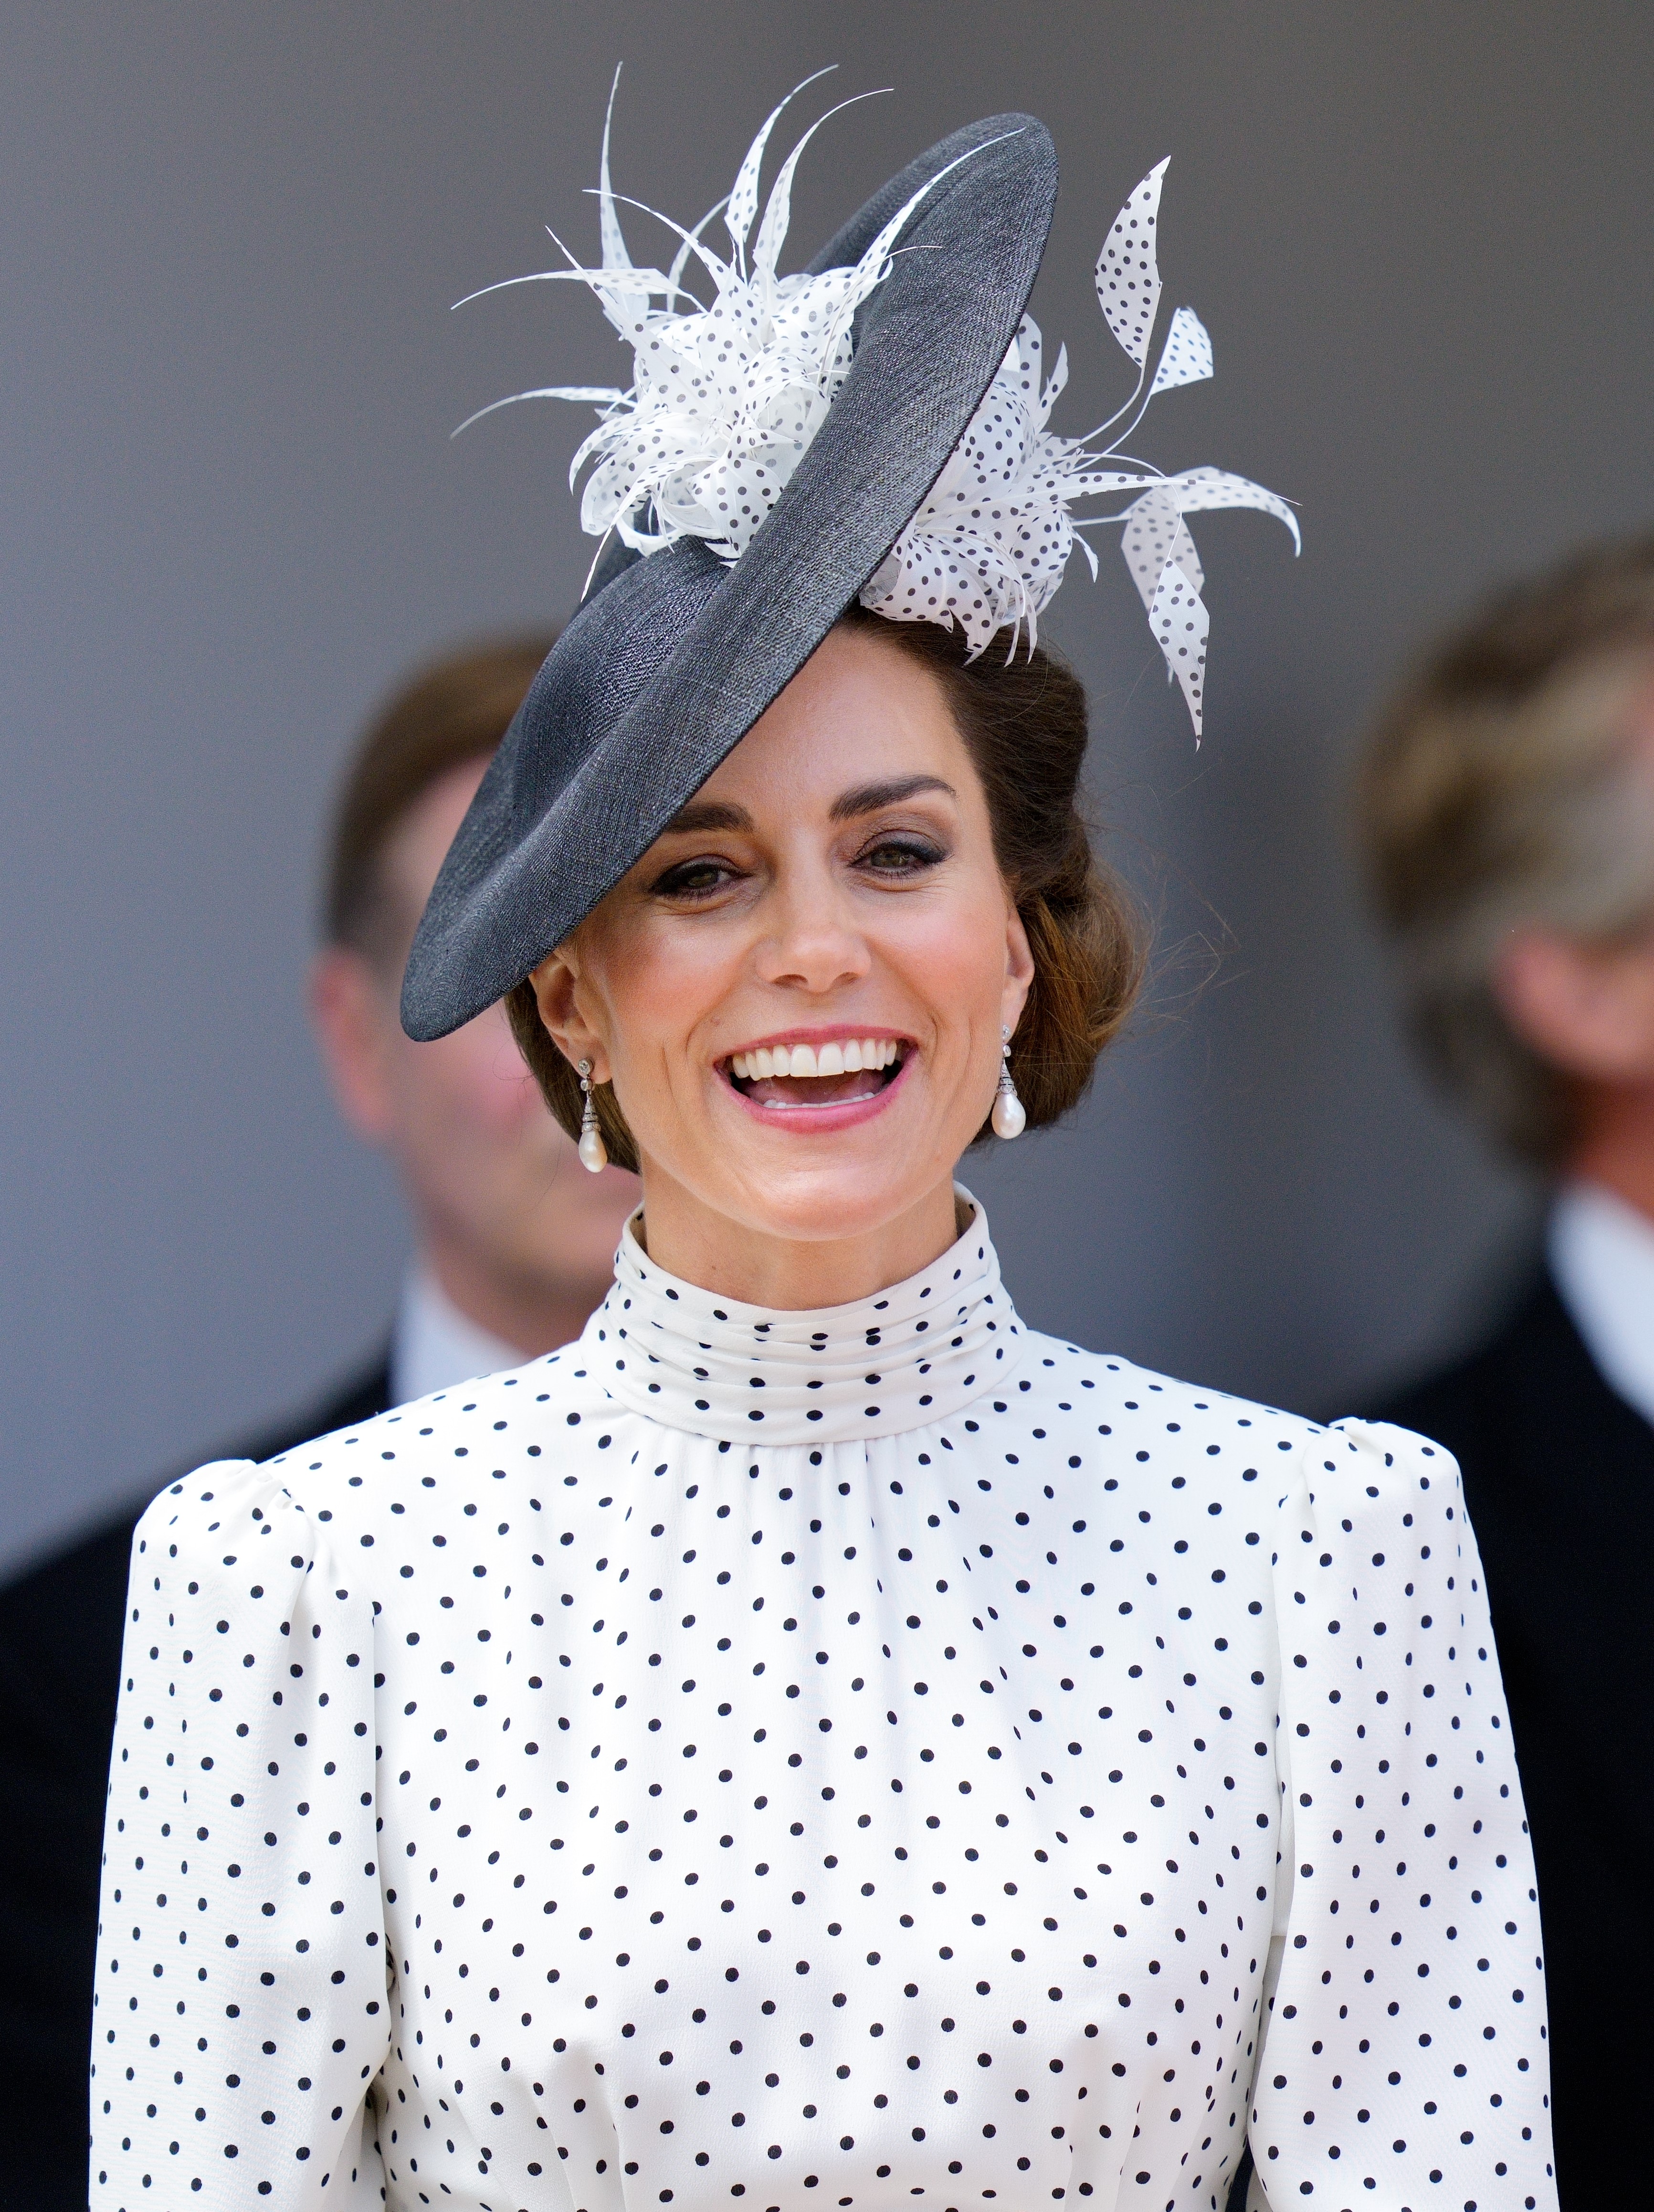 Princess Catherine at The Order of The Garter service on June 19, 2023, in Windsor, England. | Source: Getty Images